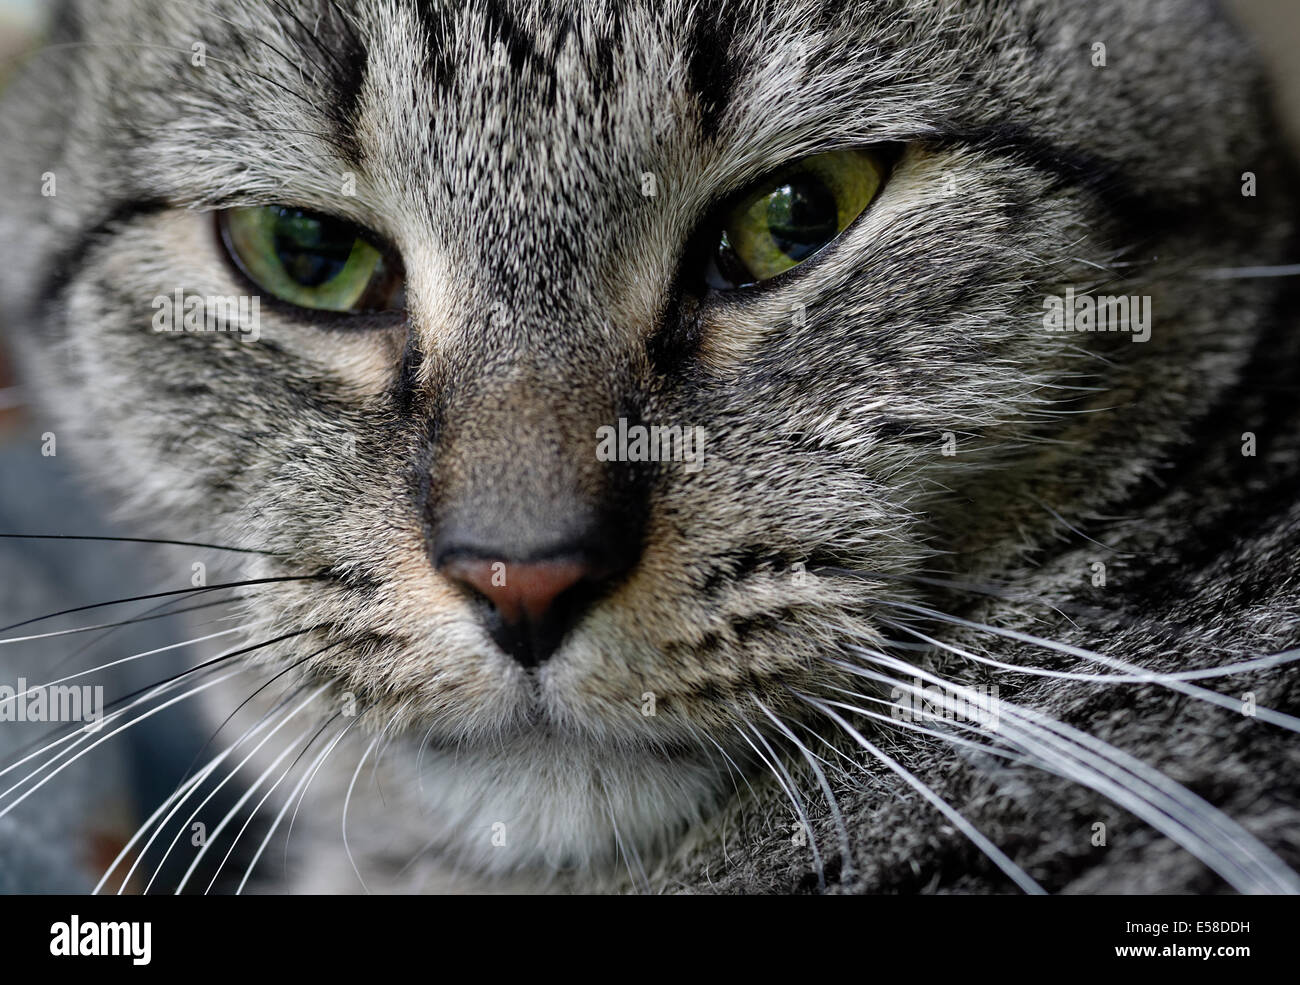 Close-up portrait of a gray tabby cat. Stock Photo